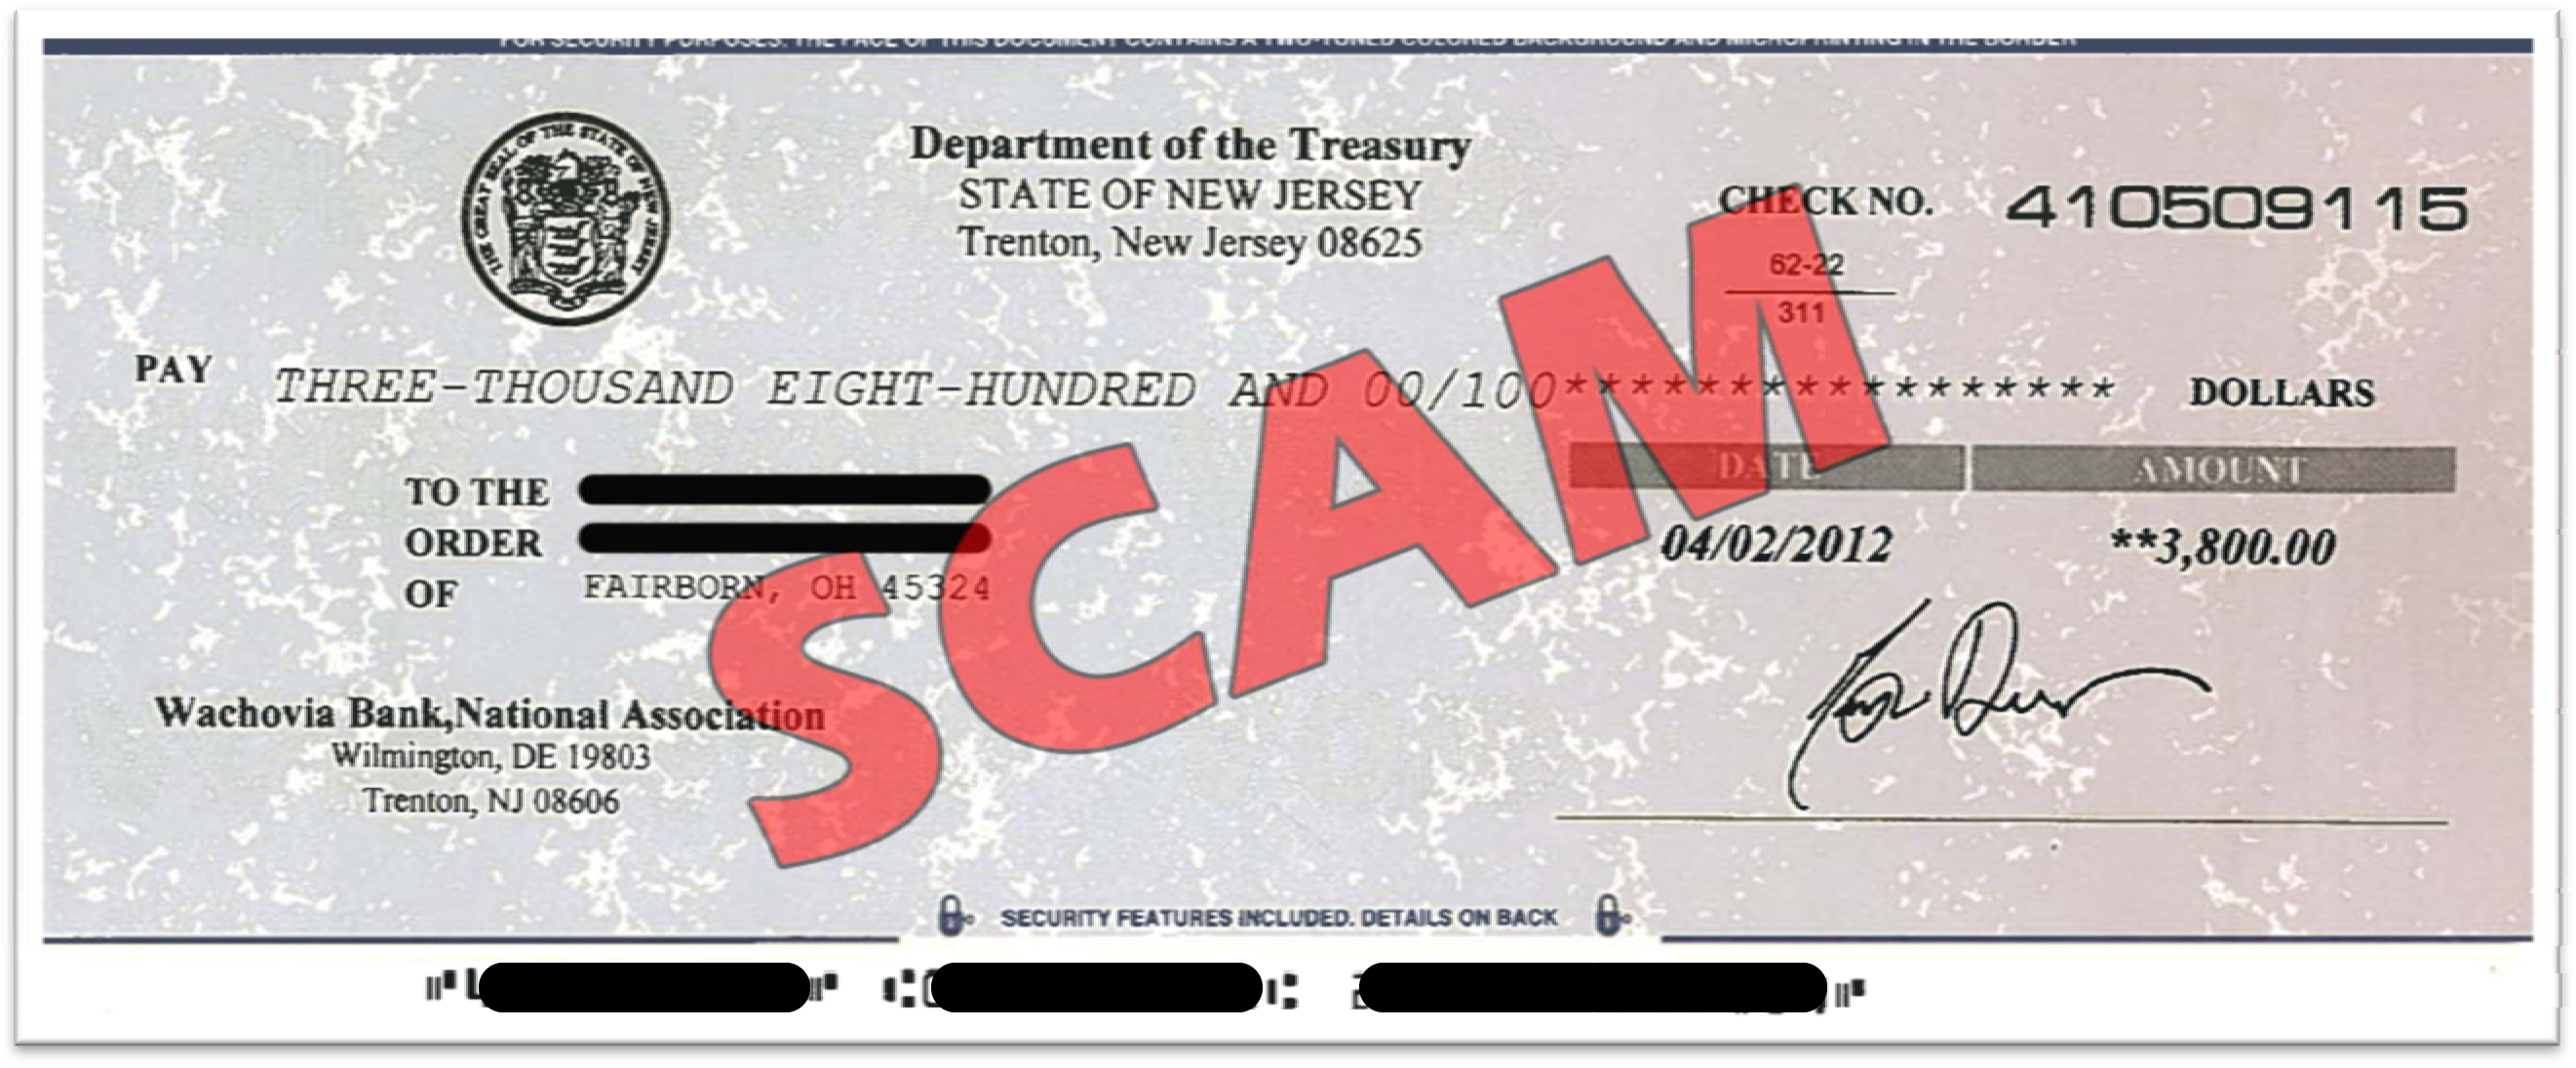 department of the treasury state of new jersey